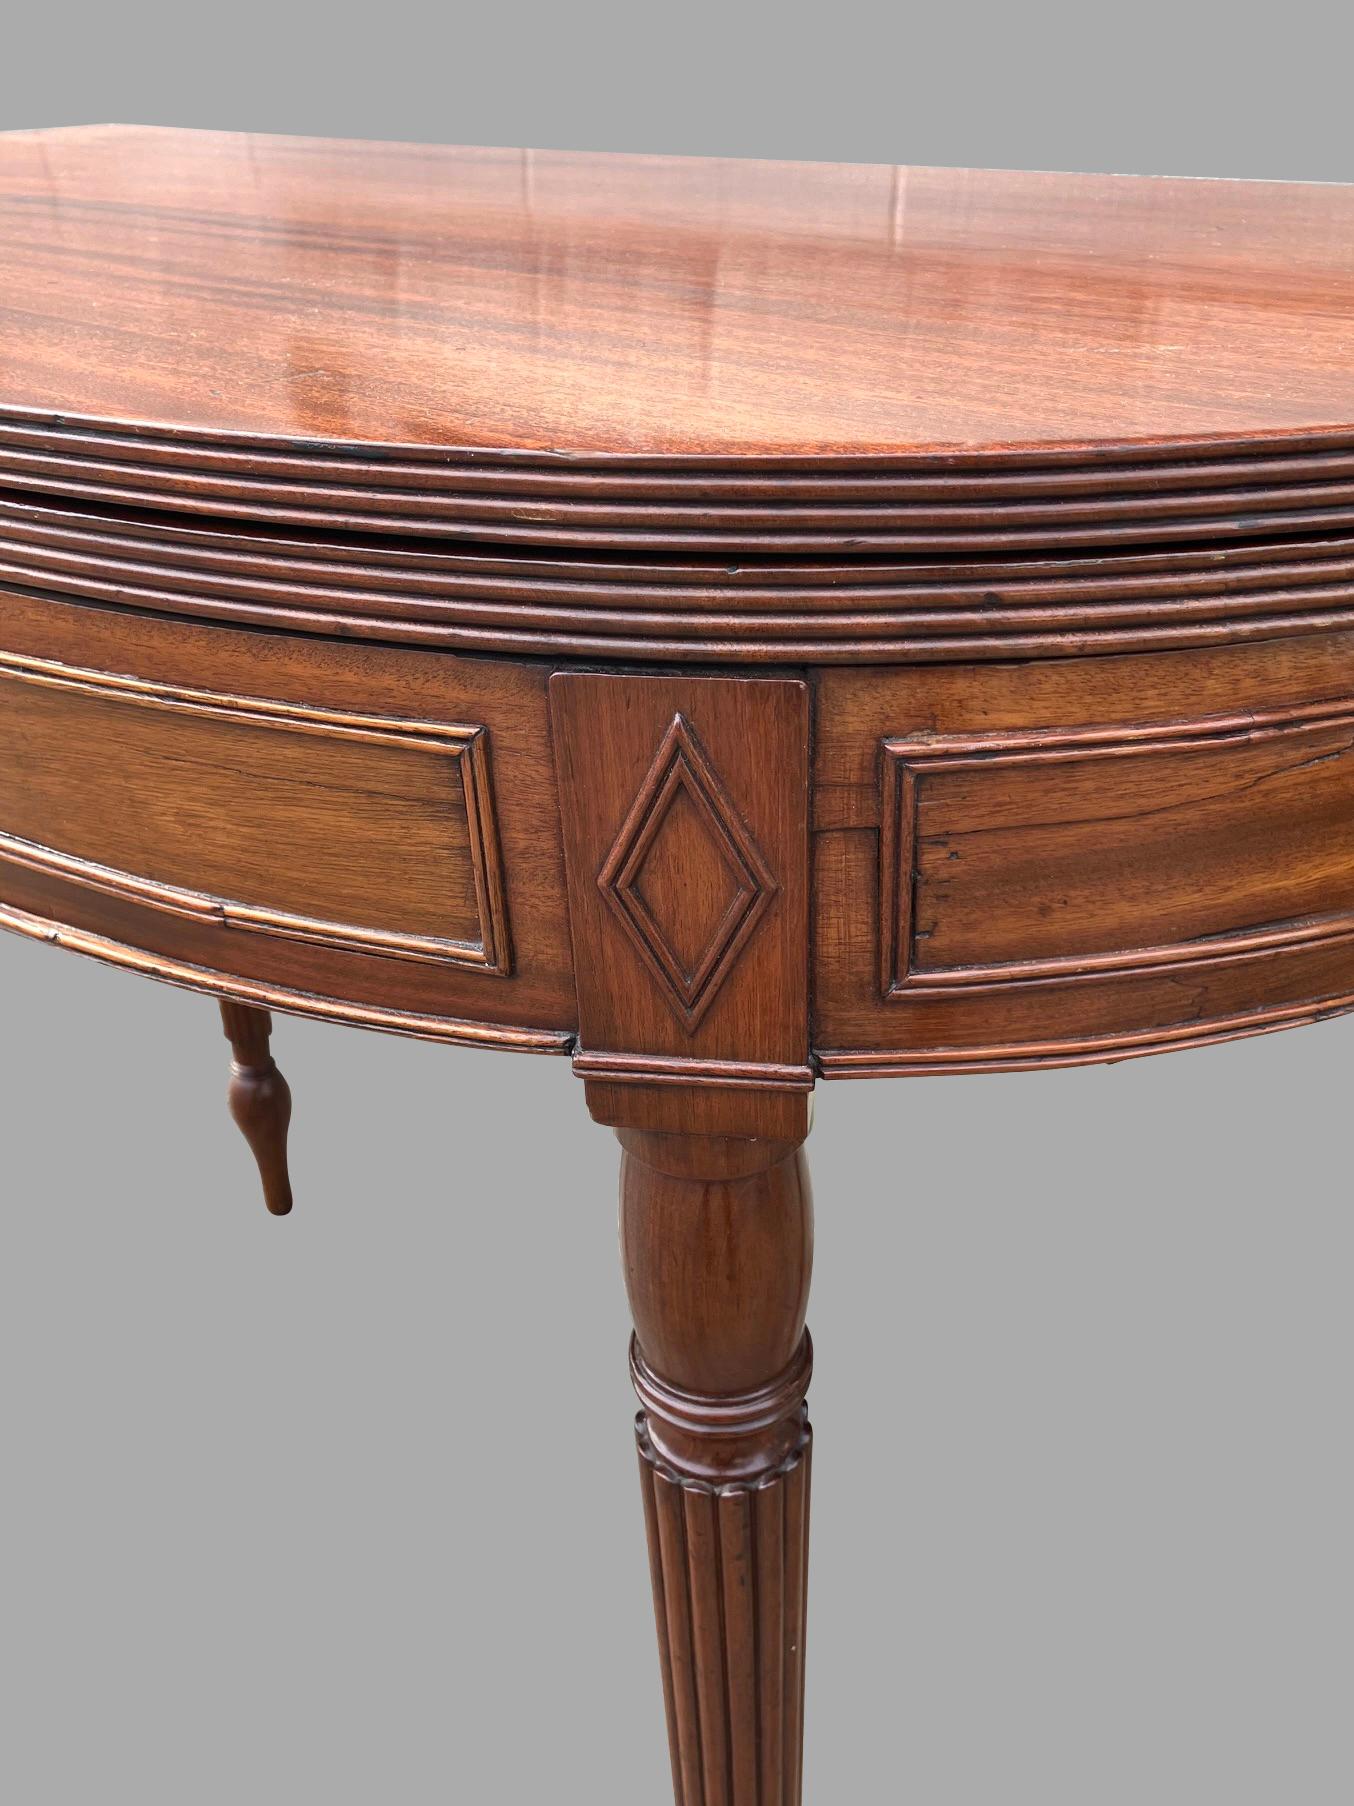 English Regency Period Mahogany Flip Top Game or Tea Table with Reeded Legs For Sale 2